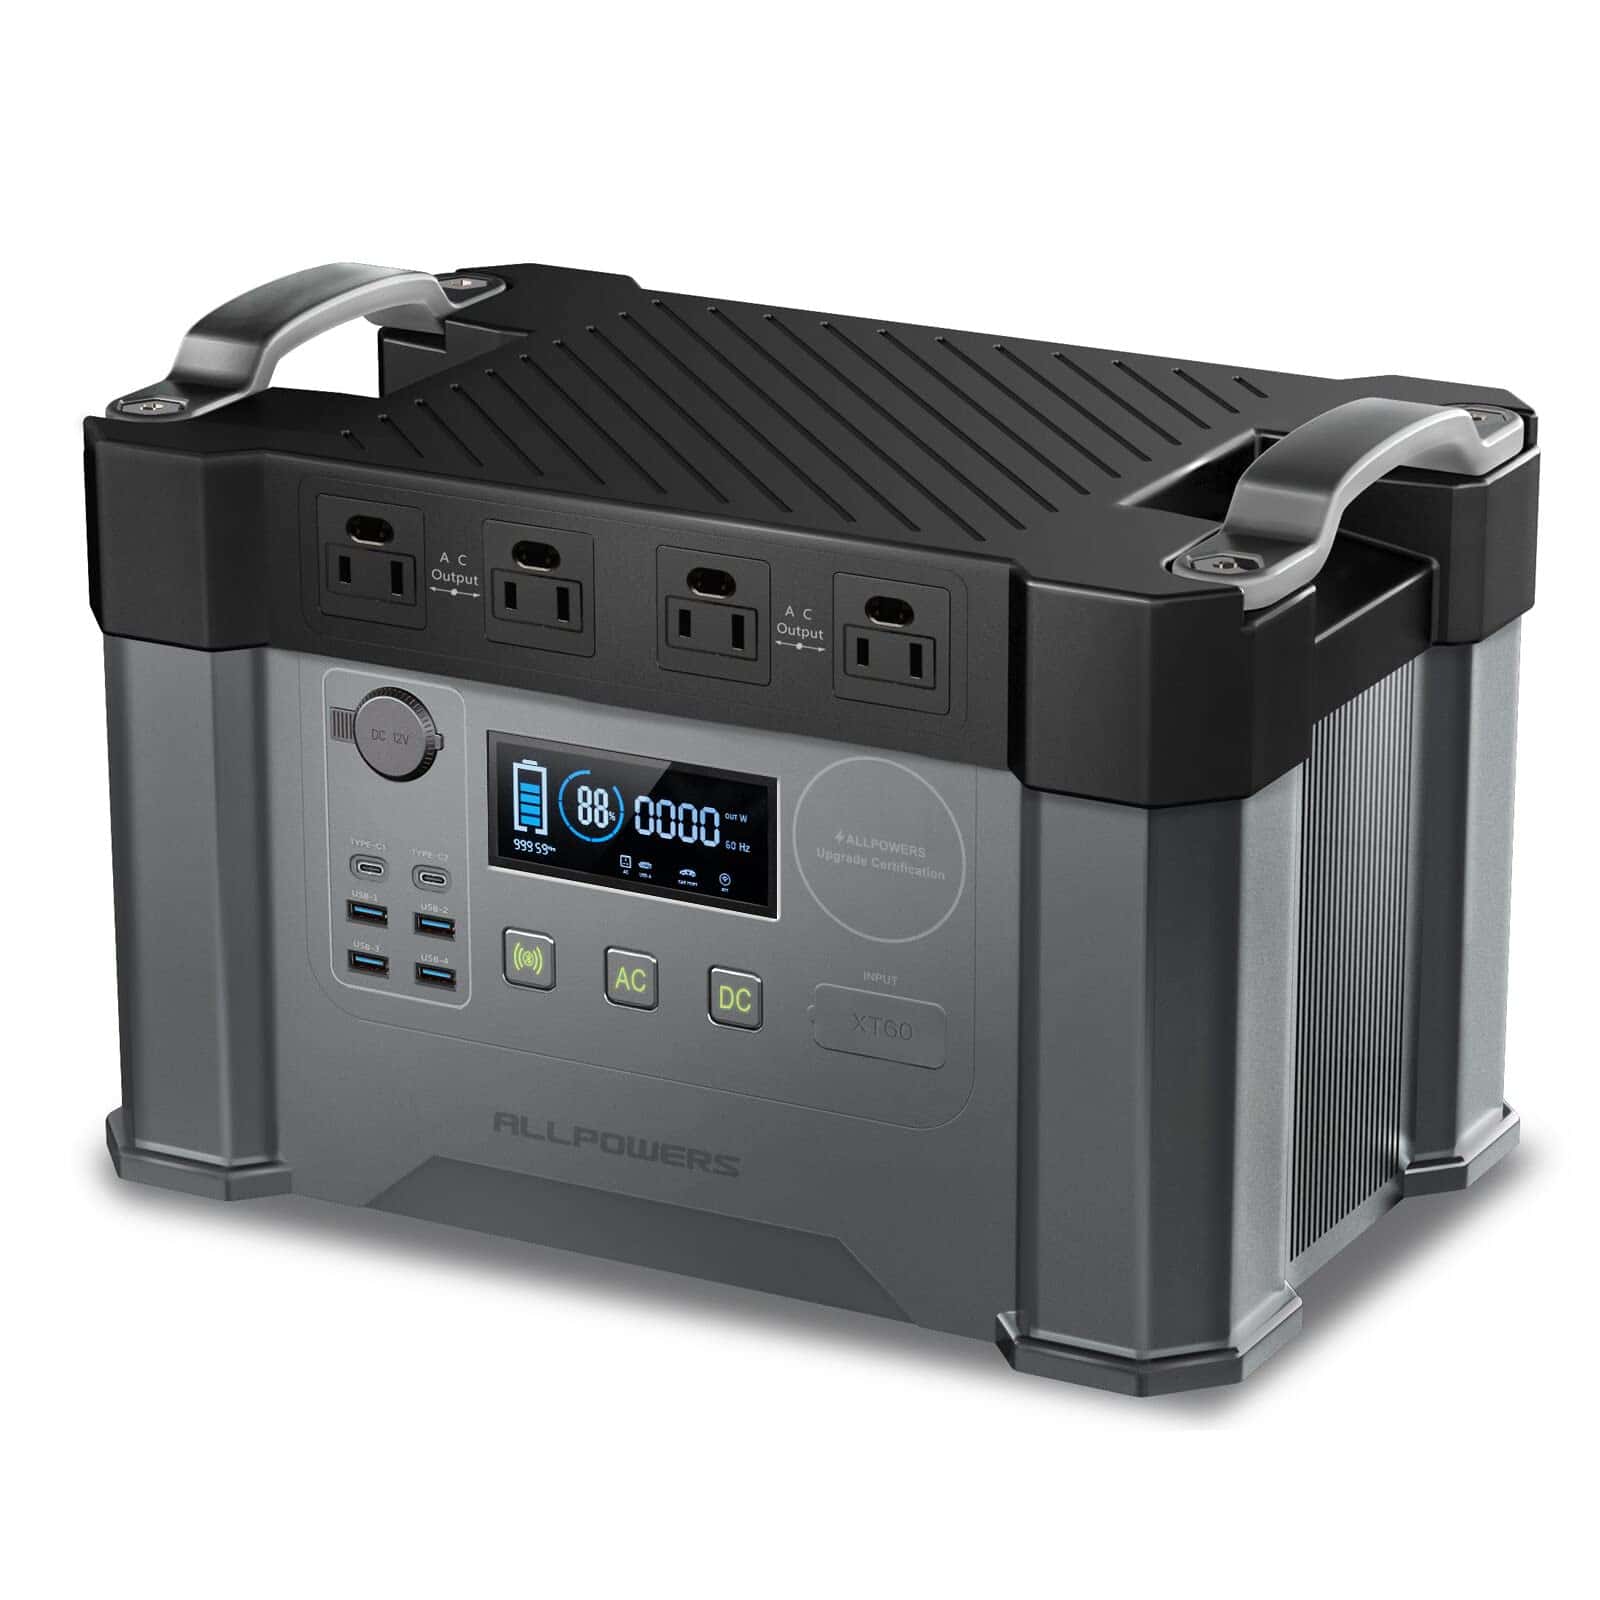 Allpowers S2000 Portable Power Station